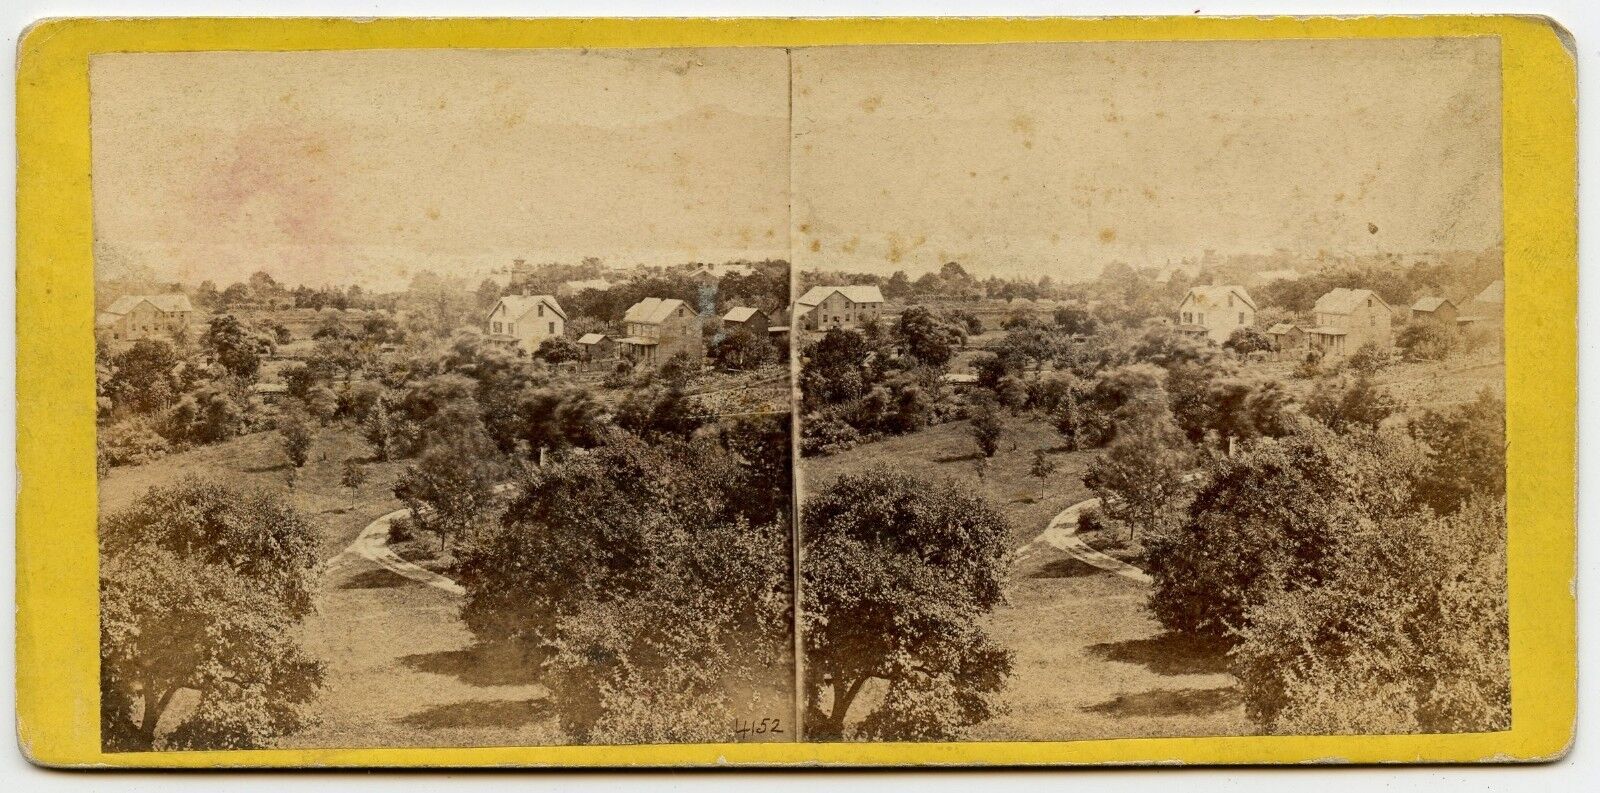 Cornwall New York Hudson River Vintage Stereoview Photo by Anthony